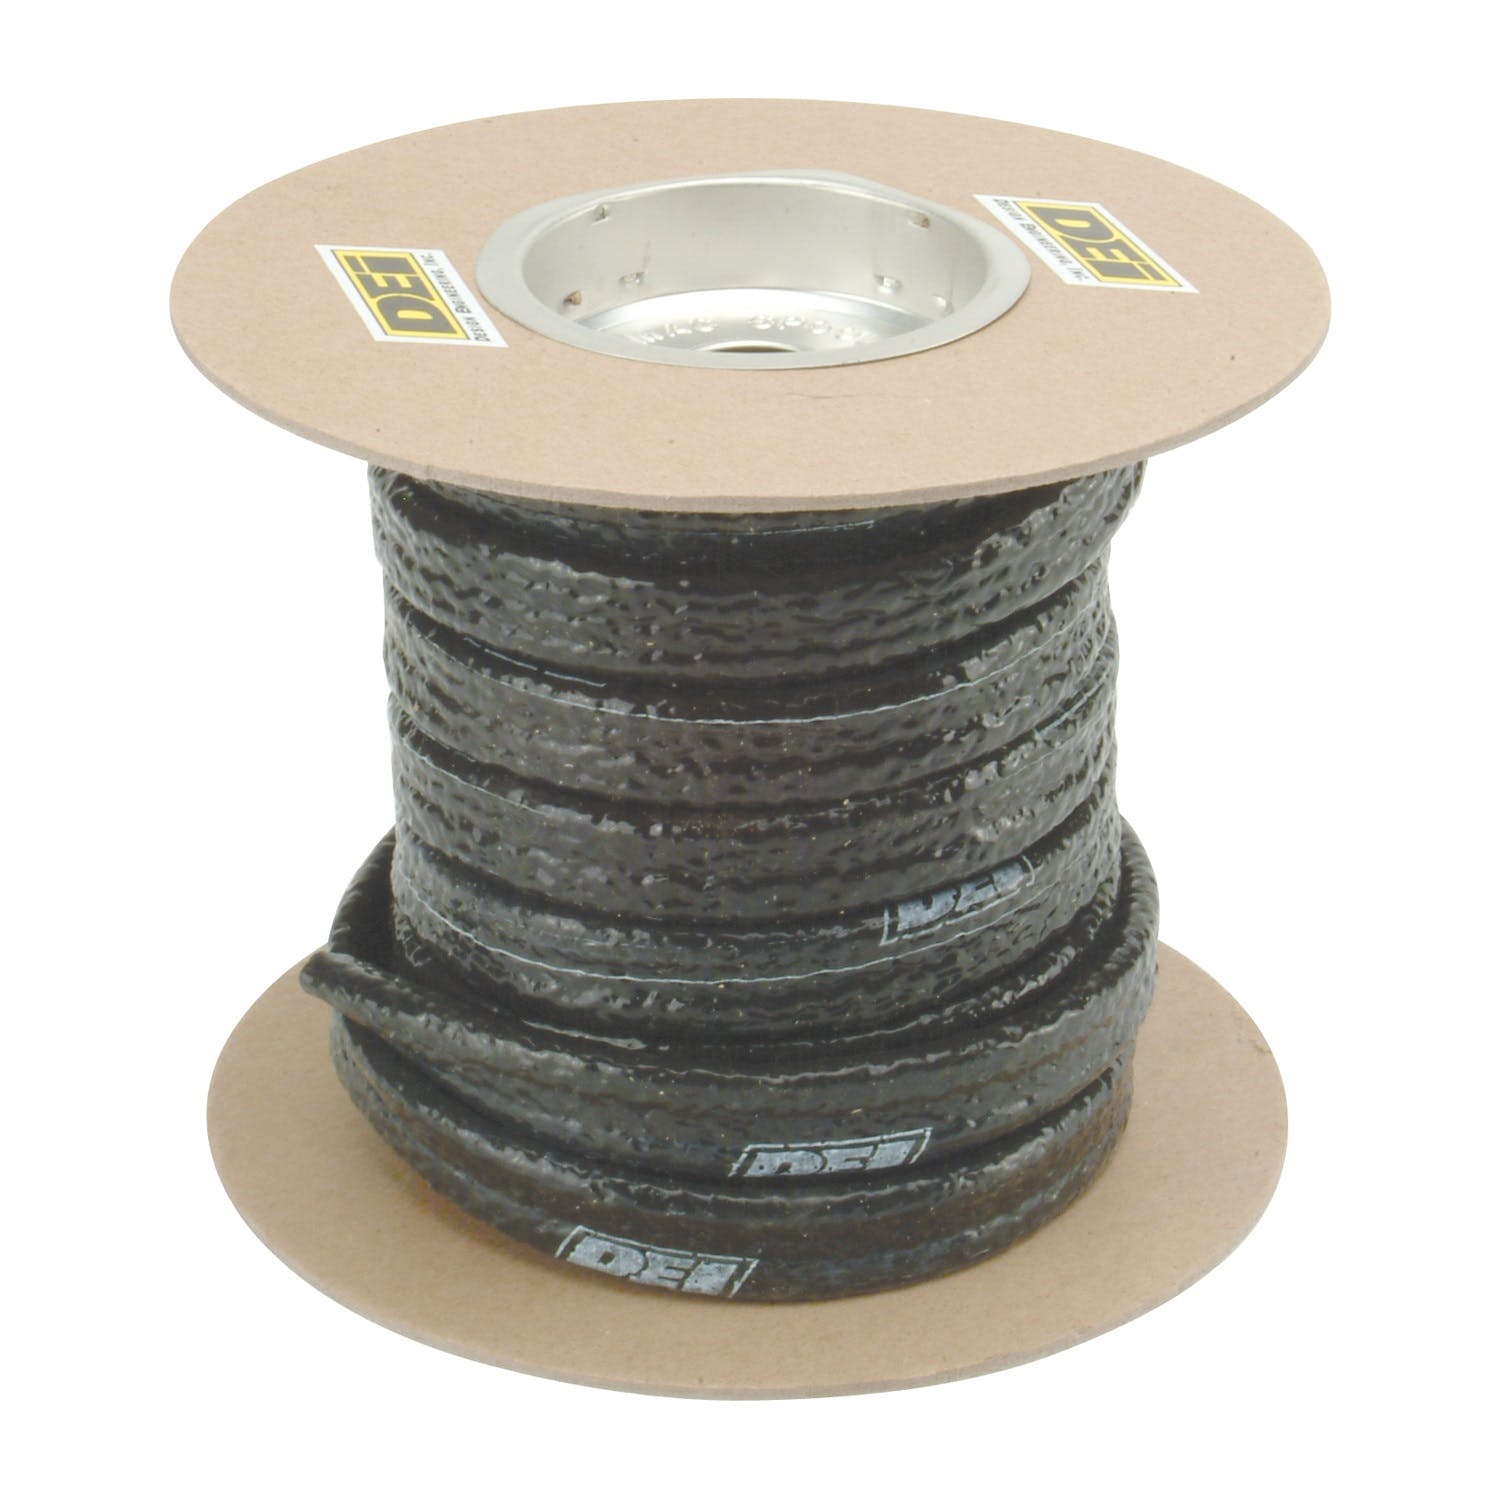 Design Engineering, Inc. 91470 Fire Sleeve 3/8 I.D. - Bulk per foot (Fire Tape not included)